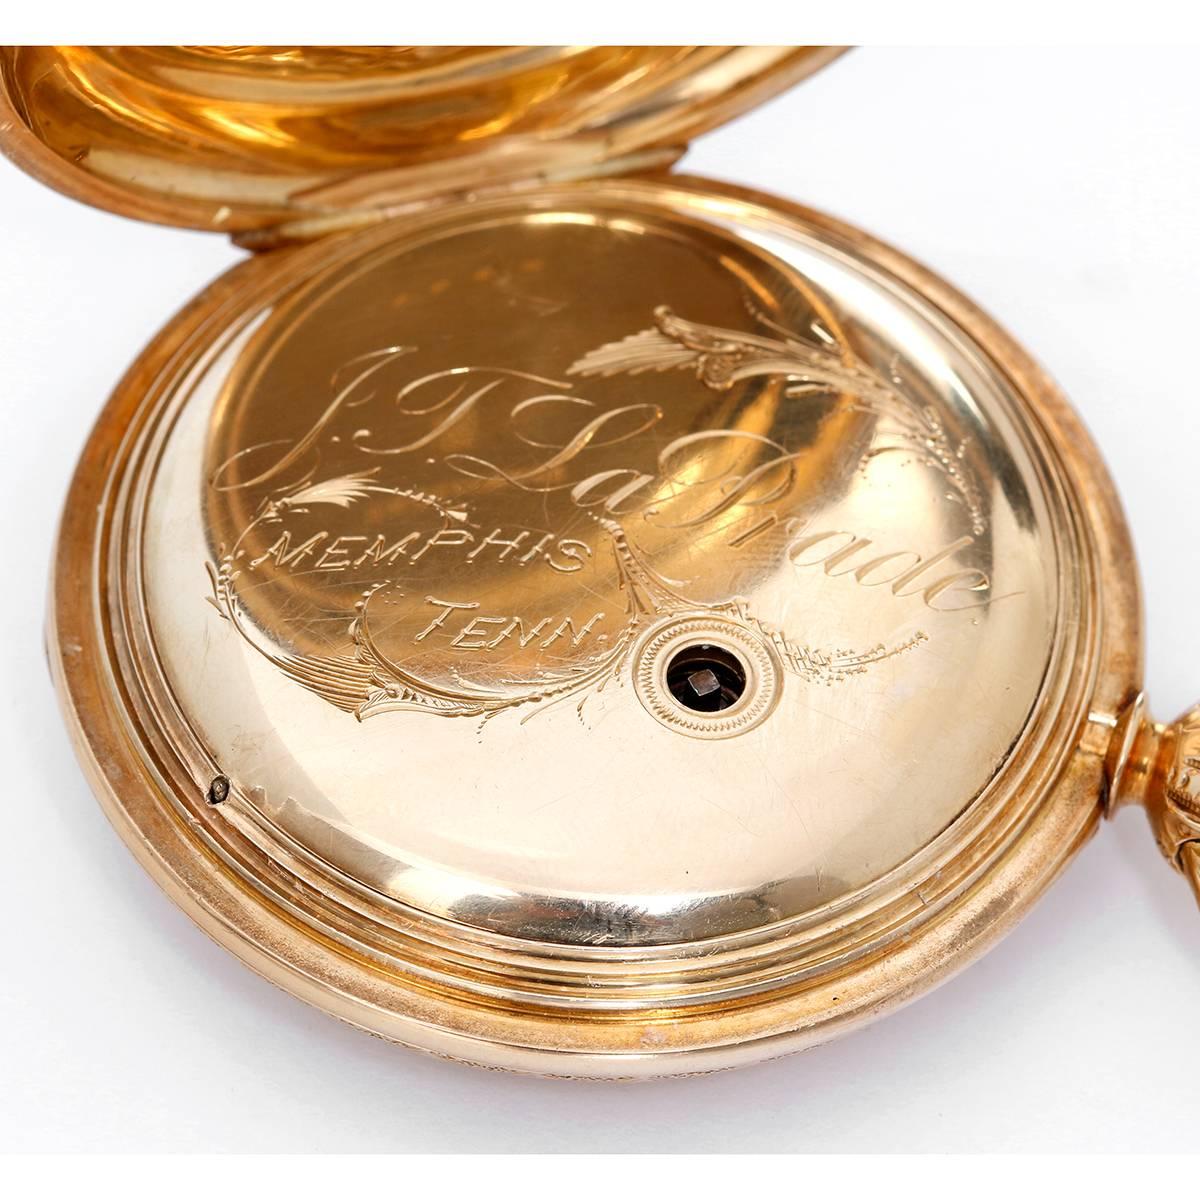 engraved gold pocket watch